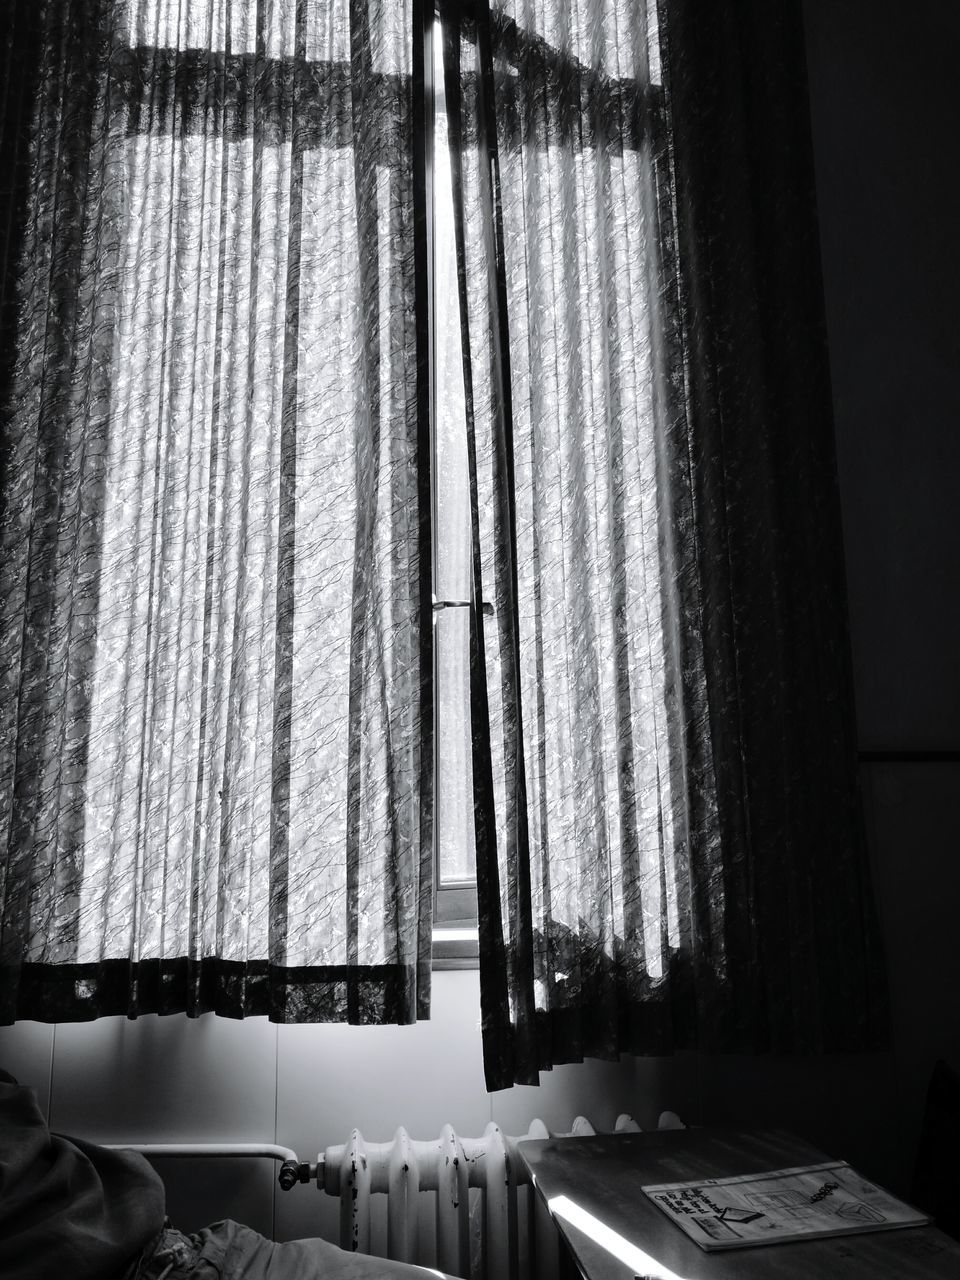 indoors, window, home interior, curtain, sunlight, absence, chair, glass - material, empty, no people, day, shadow, tree, transparent, table, built structure, house, domestic room, architecture, hanging